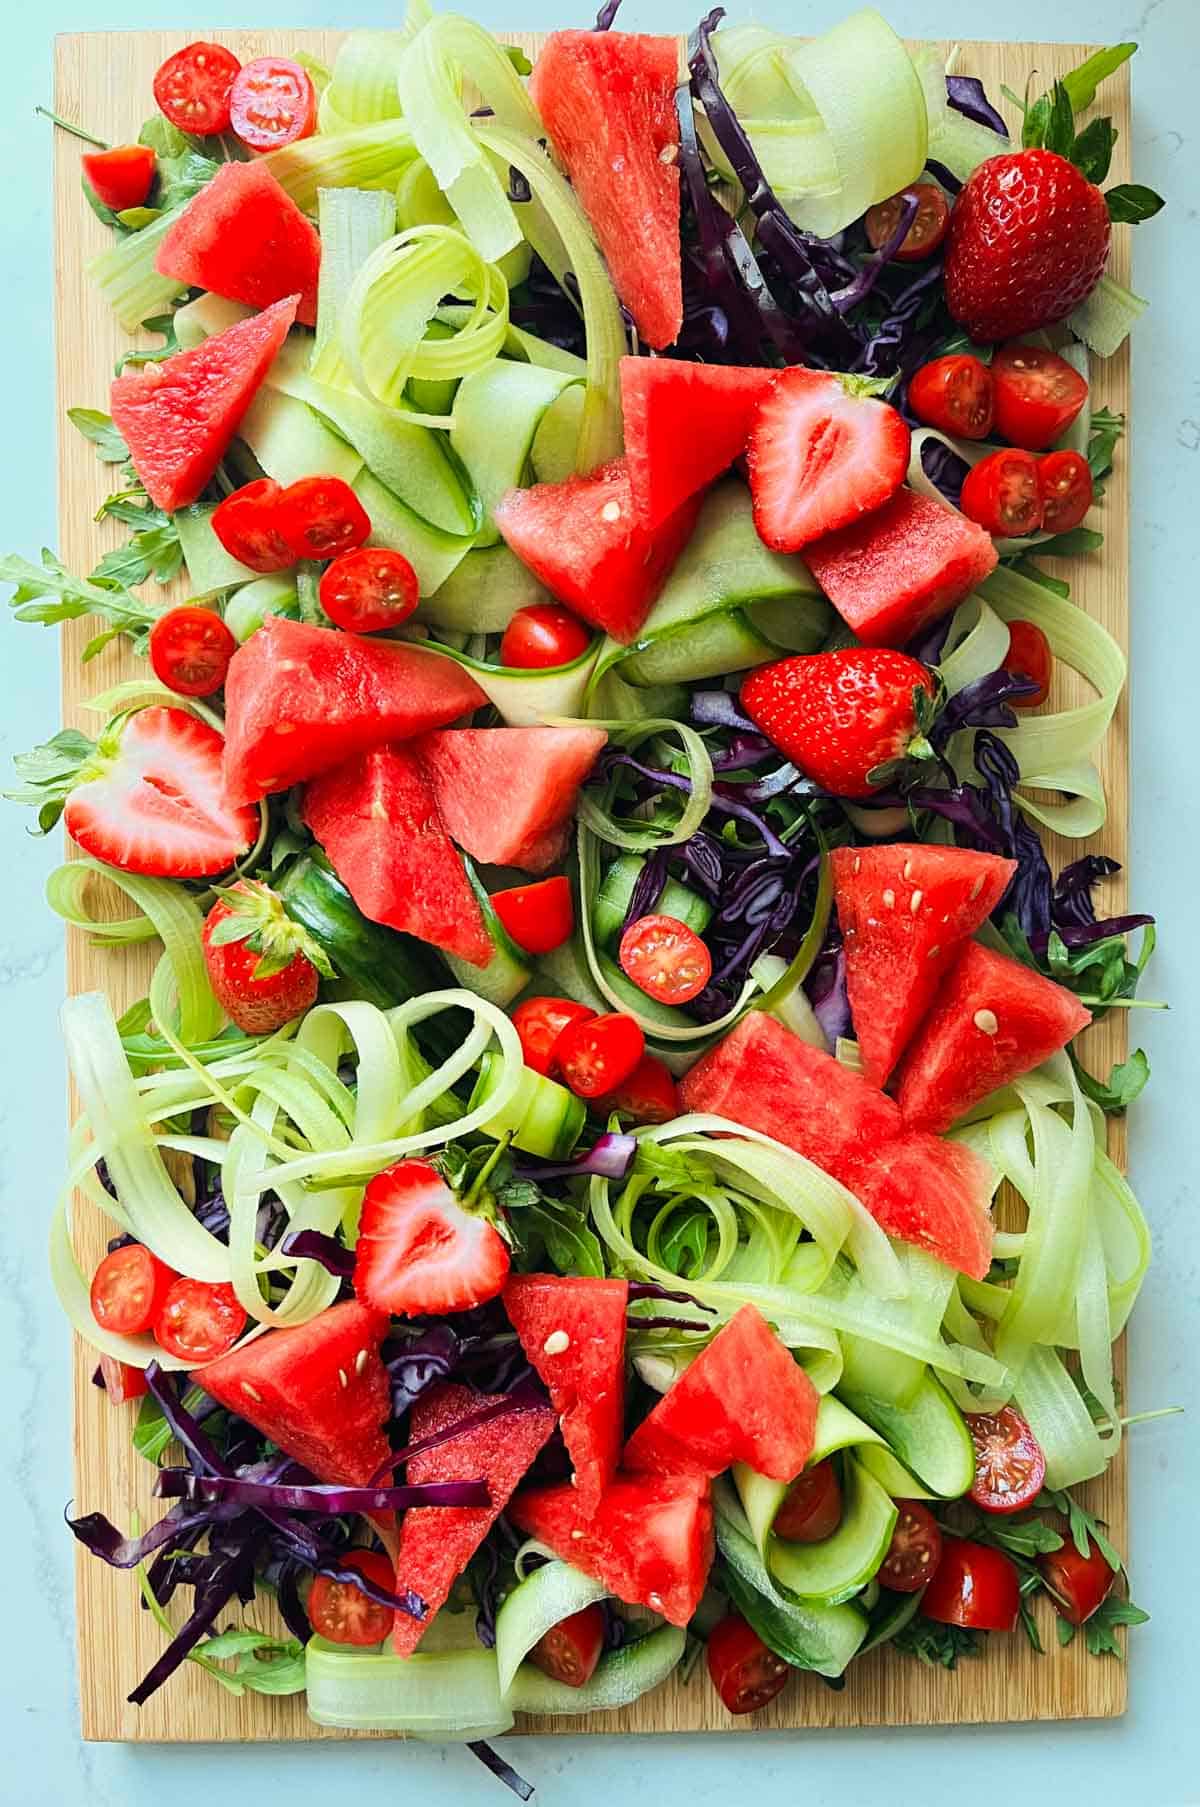 Rocket leaves, chopped red cabbage, celery and cucumber ribbons, watermelon, strawberries and tomatoes on a wooded board.